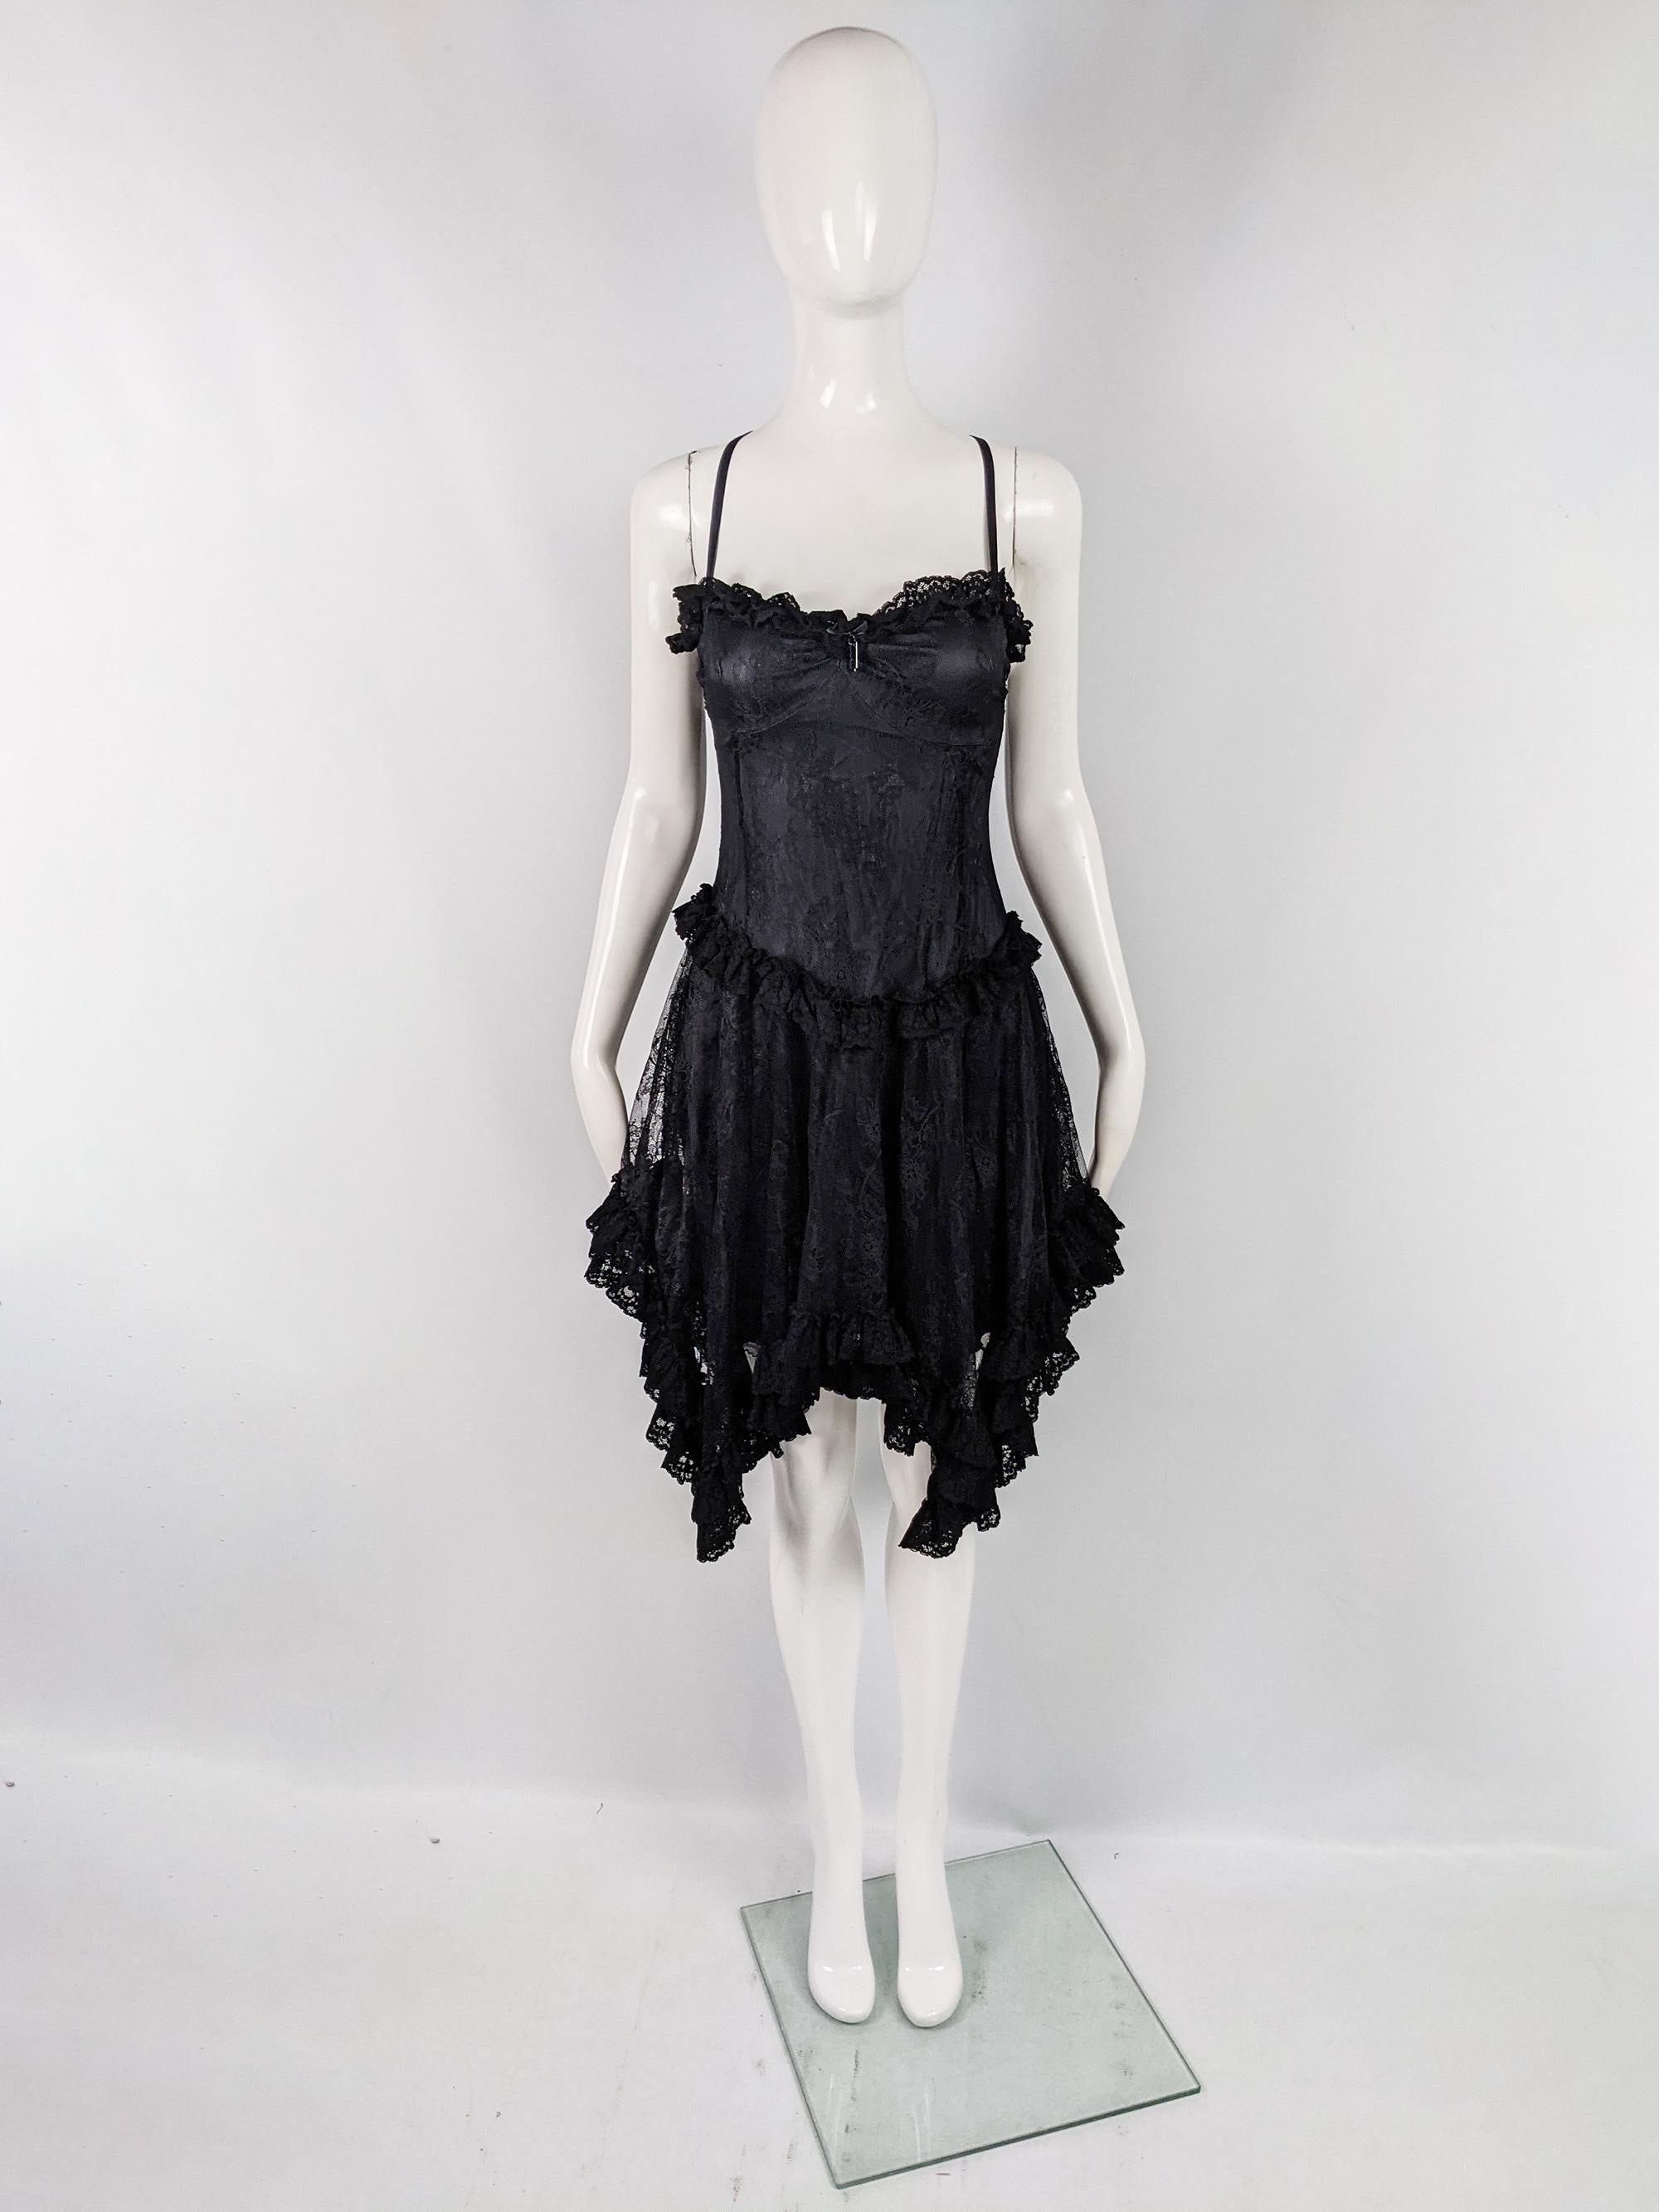 A stunning vintage party dress from the early 2000s by luxury British fashion designer, John Richmond. In a black gothic / vampy lace and silk fabric with a flirty handkerchief hem. 

Size: Marked IT 44 but measures more like a modern UK 8-10/ US